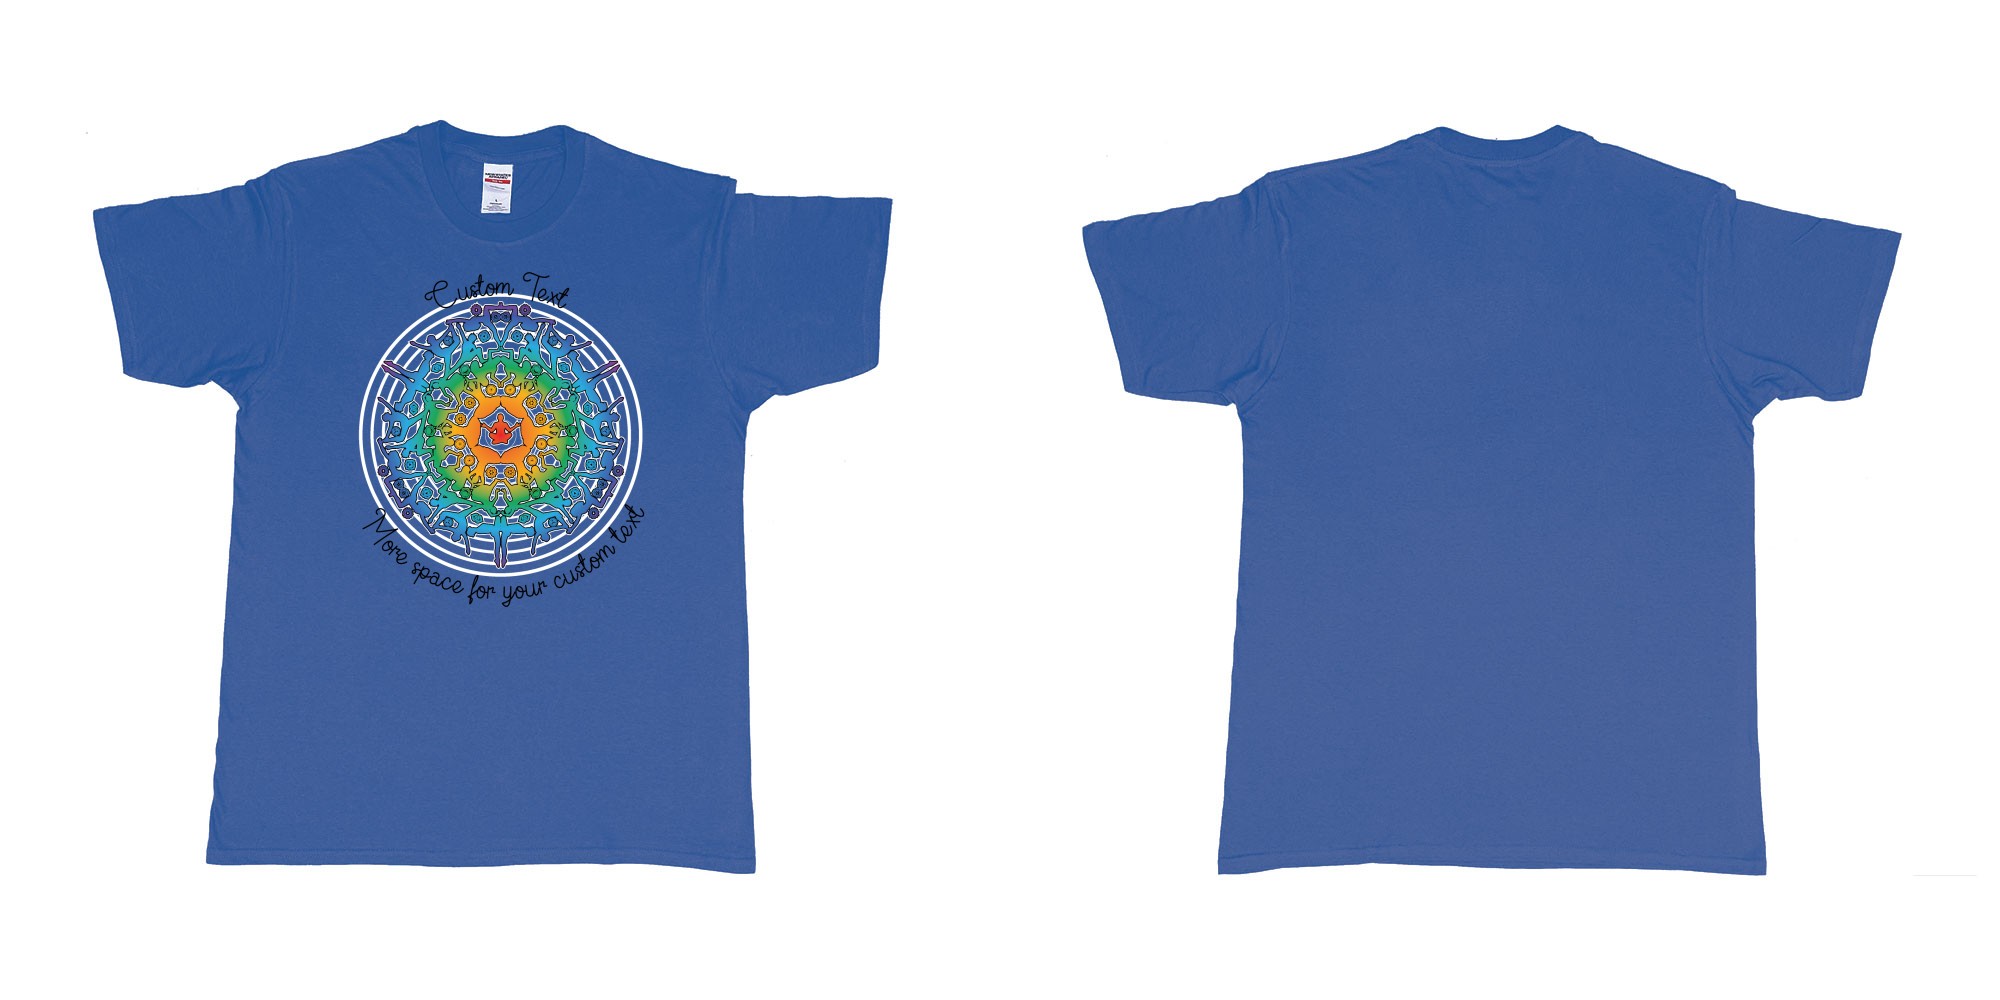 Custom tshirt design yoga mandala in fabric color royal-blue choice your own text made in Bali by The Pirate Way